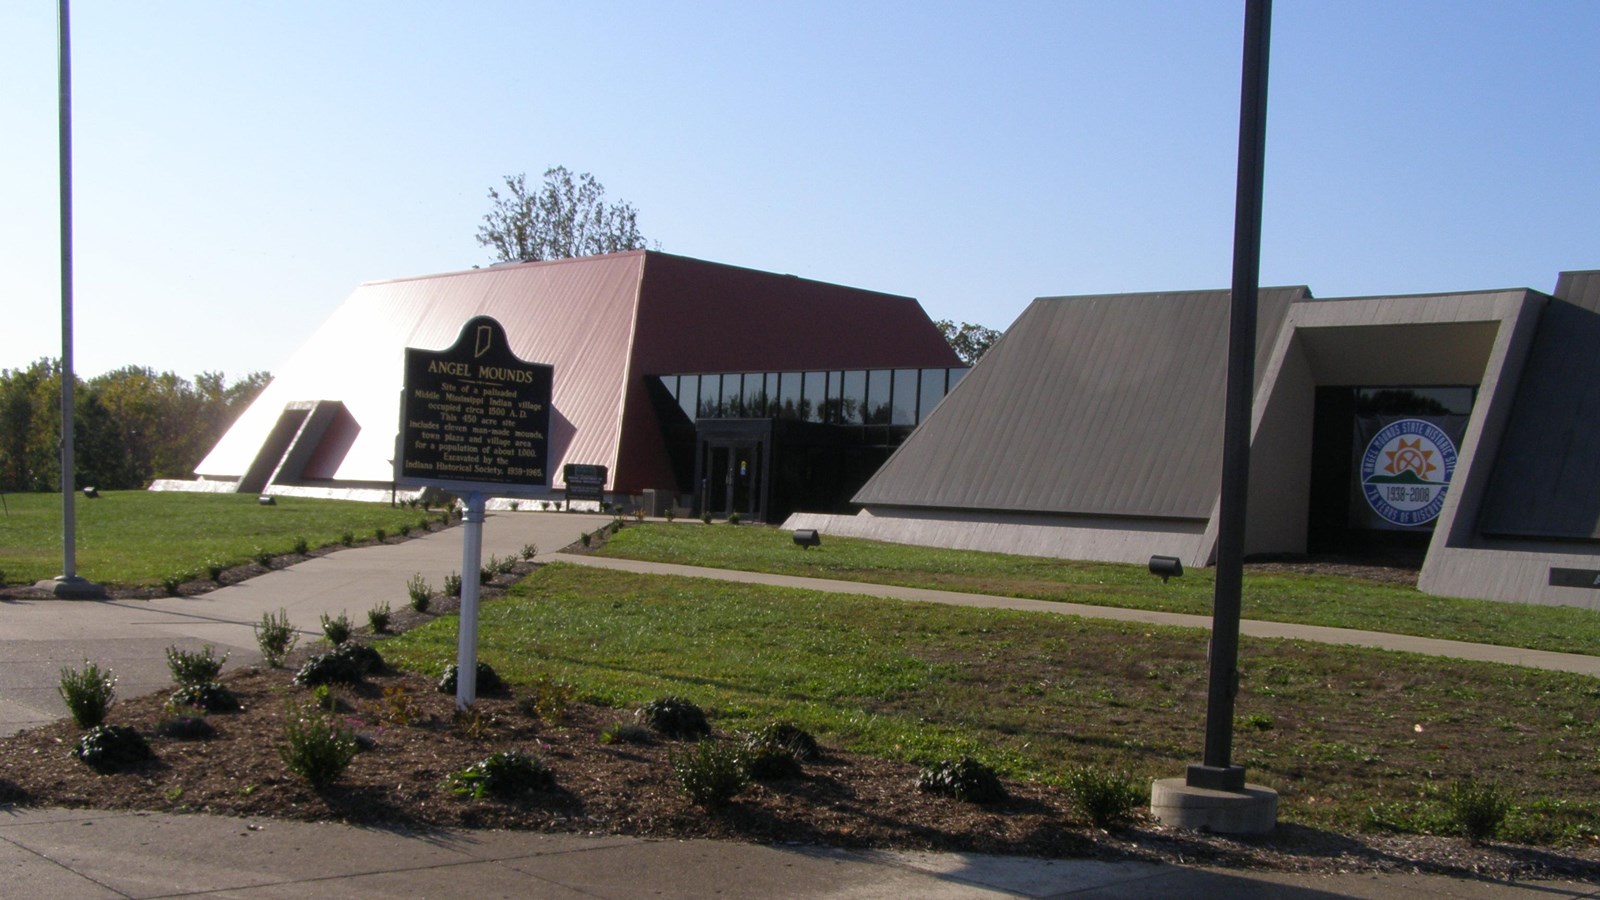 A large, angular building, a sign heading reads “Angel Mounds” in front of it.